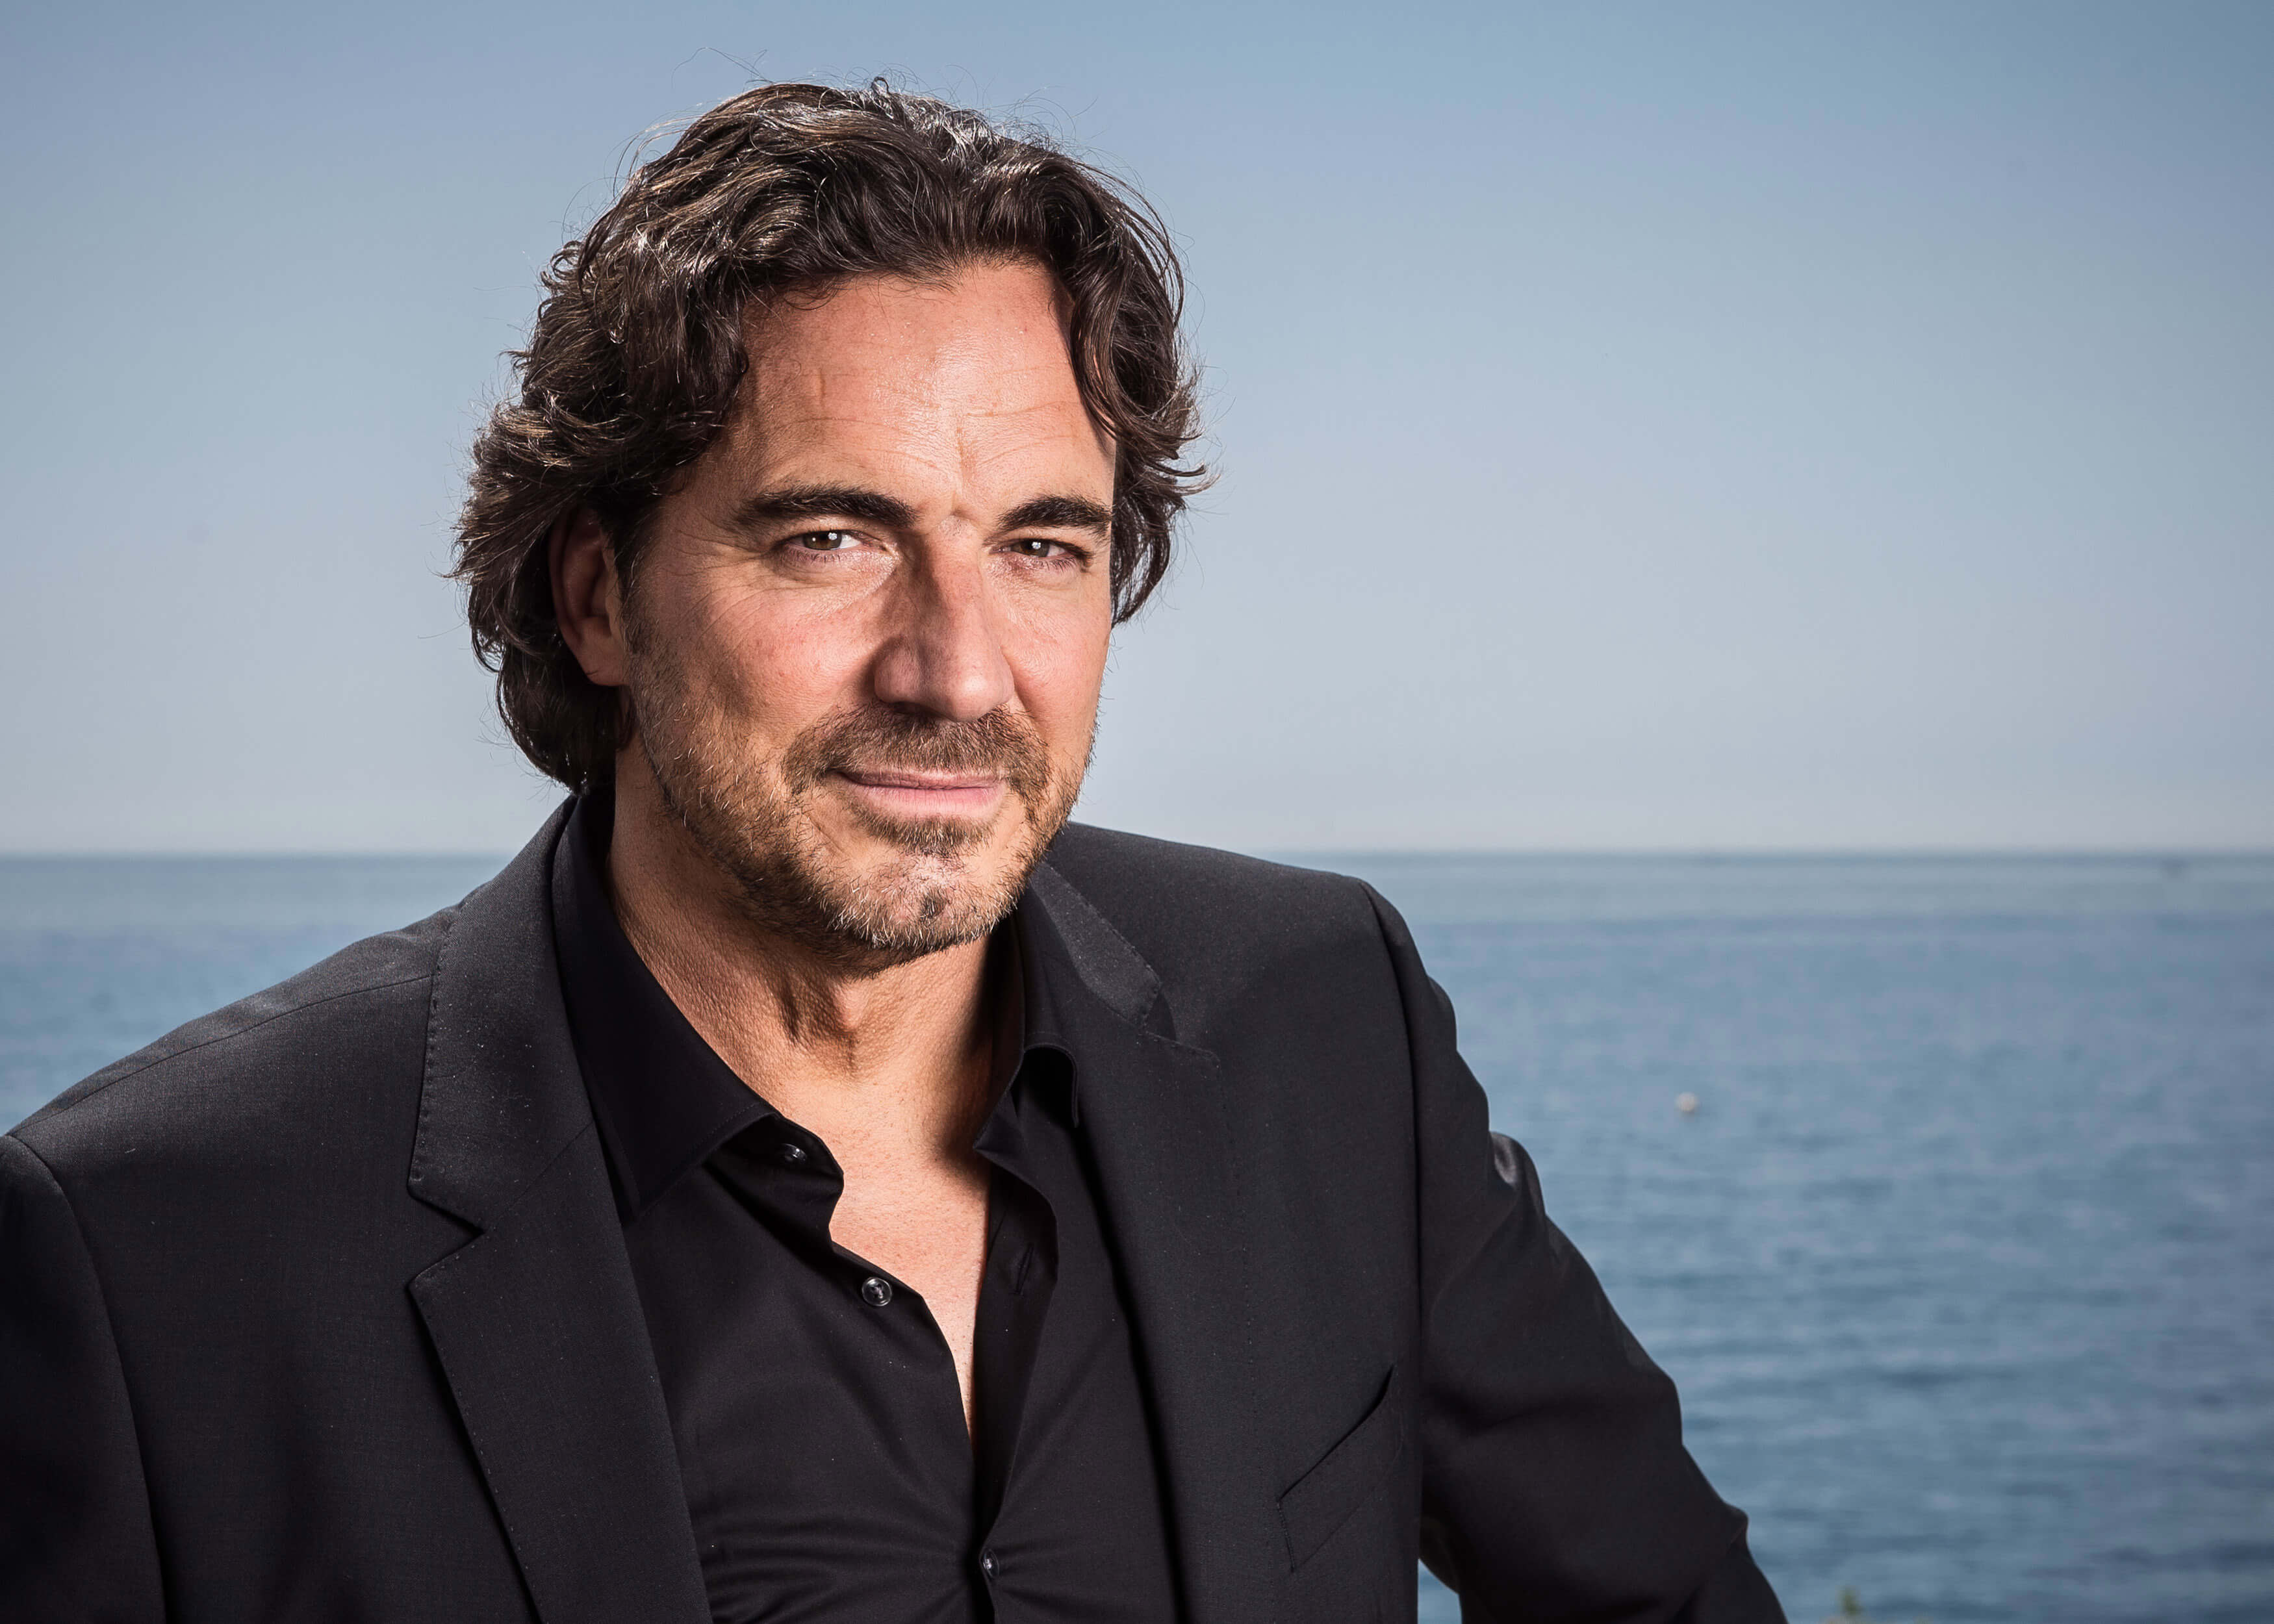 'The Bold and the Beautiful' star Thorsten Kaye dressed in a black suit; posing in front of an ocean backdrop.